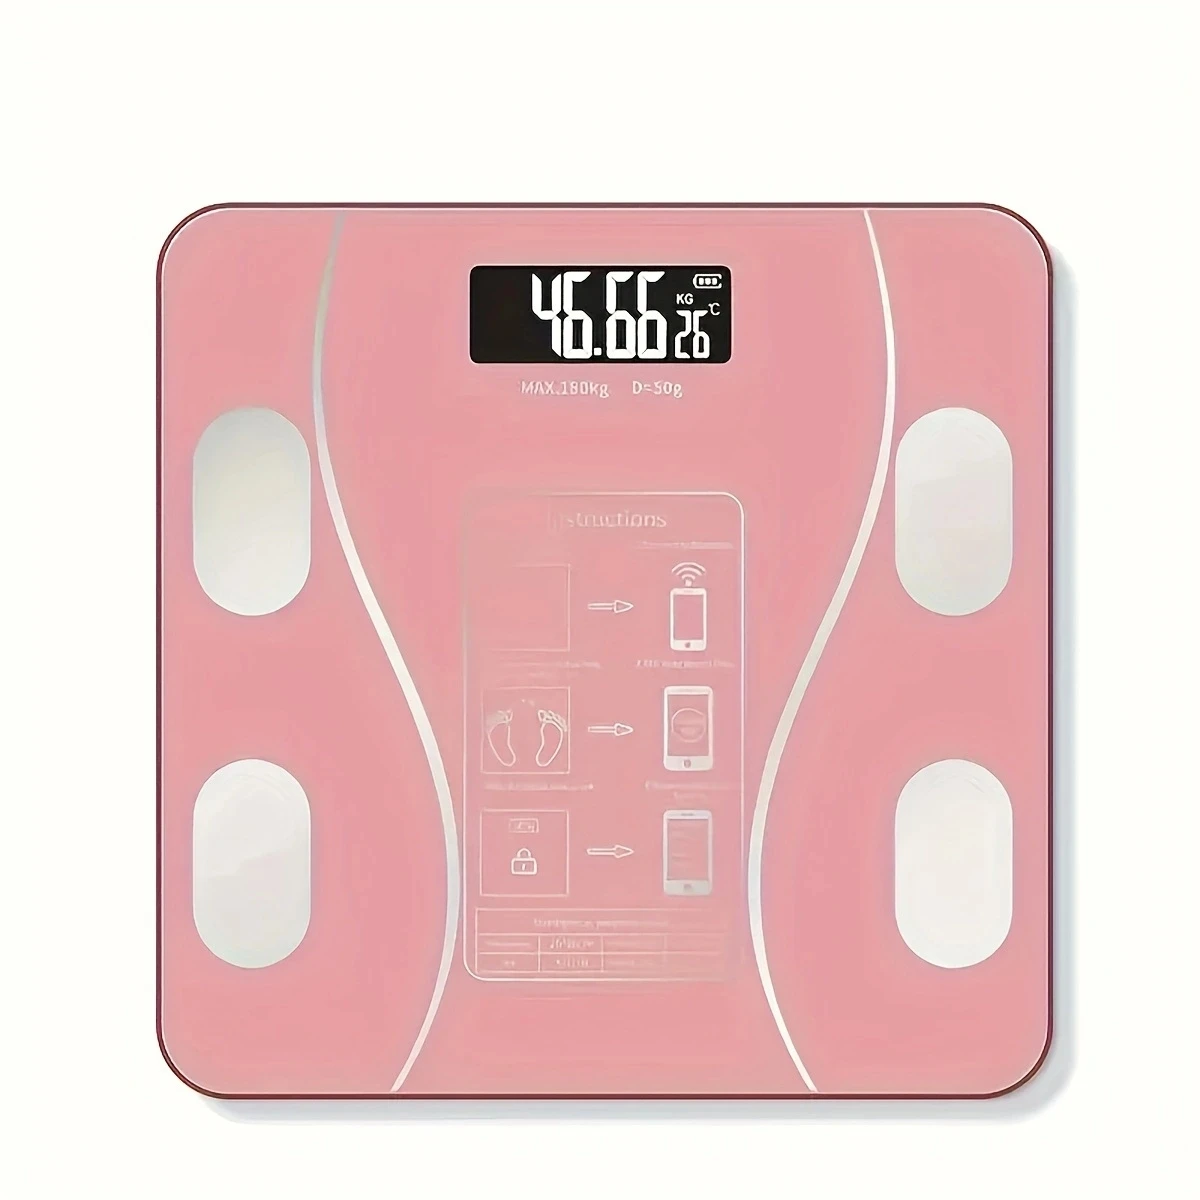 https://ae01.alicdn.com/kf/Saa4b870710f04702bc1bb92166eb7e5c5/1pc-APP-Intelligent-Body-Fat-Scale-Home-Electronic-Scale-Body-Weight-Scale-Perfect-Christmas-Gift.jpg